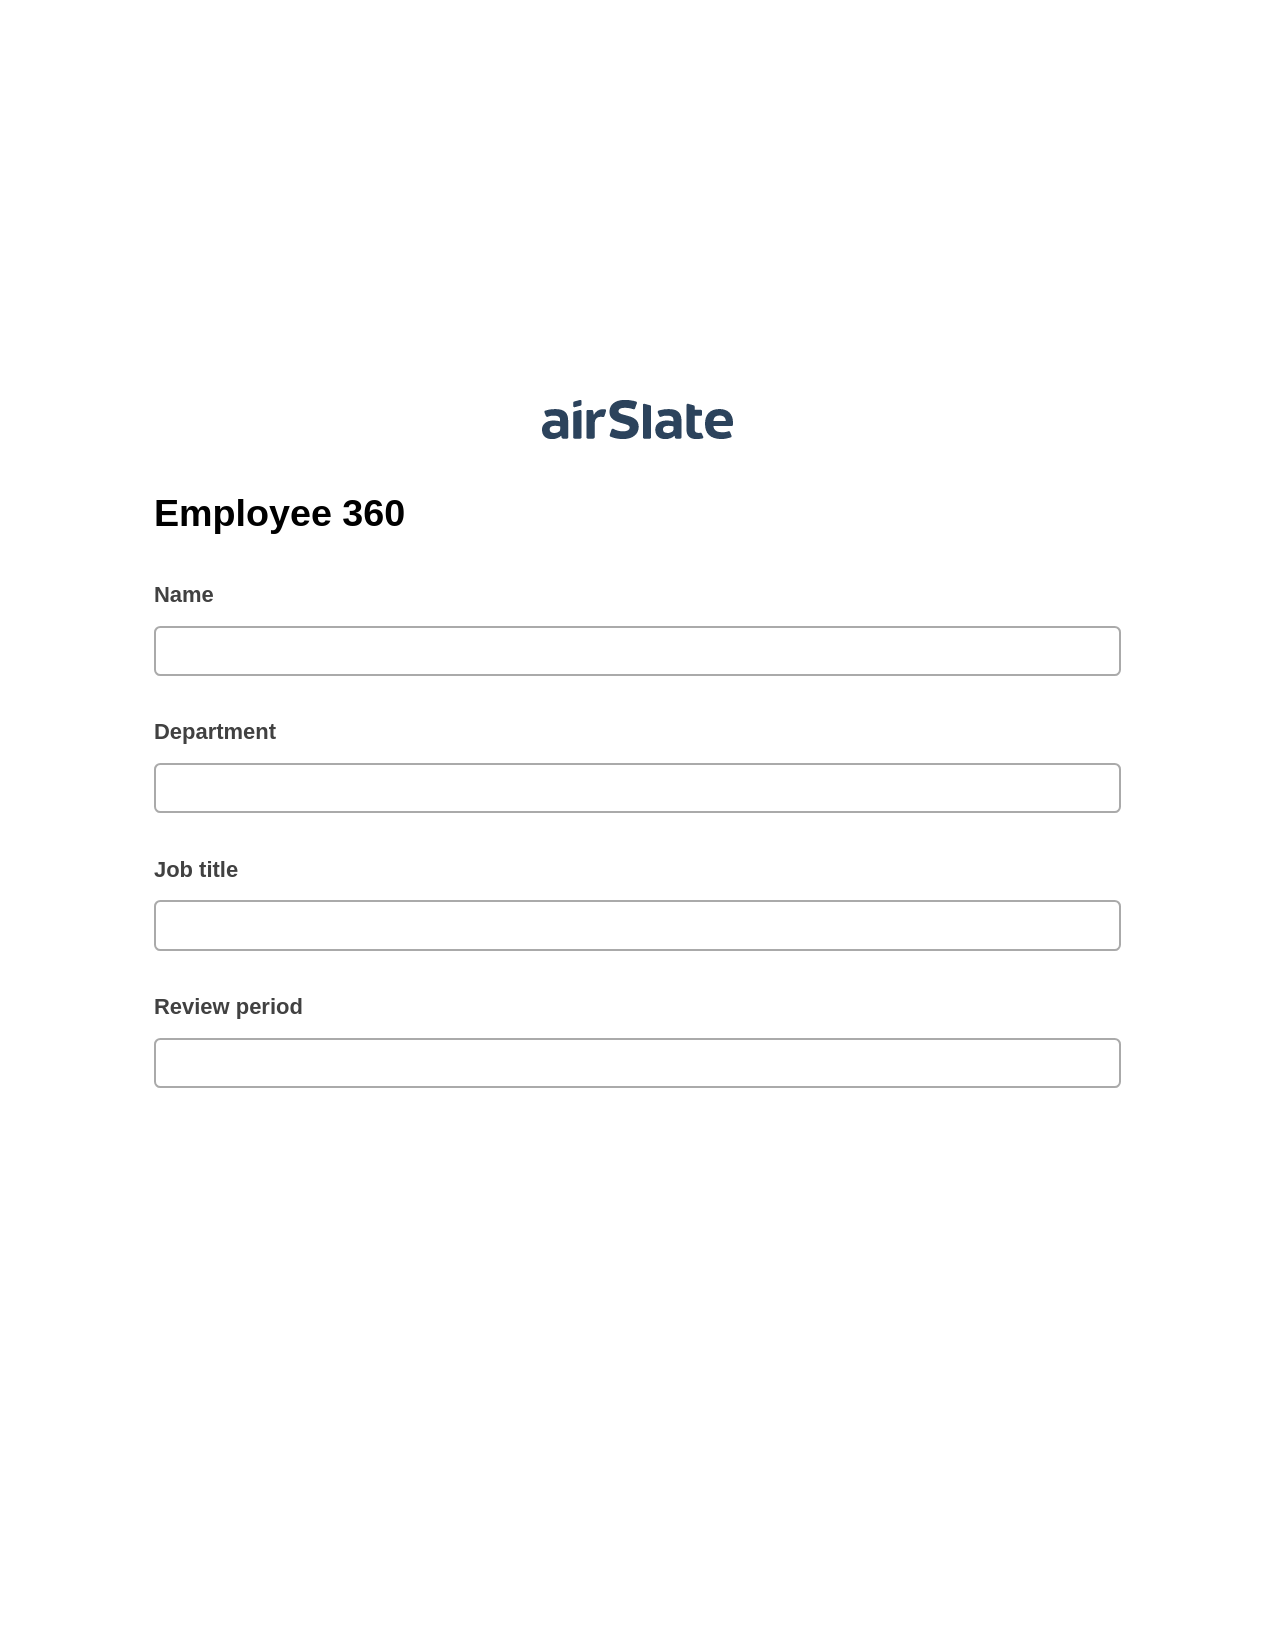 Employee 360 Pre-fill from CSV File Bot, Assign Roles to Recipients Bot, Export to MySQL Bot